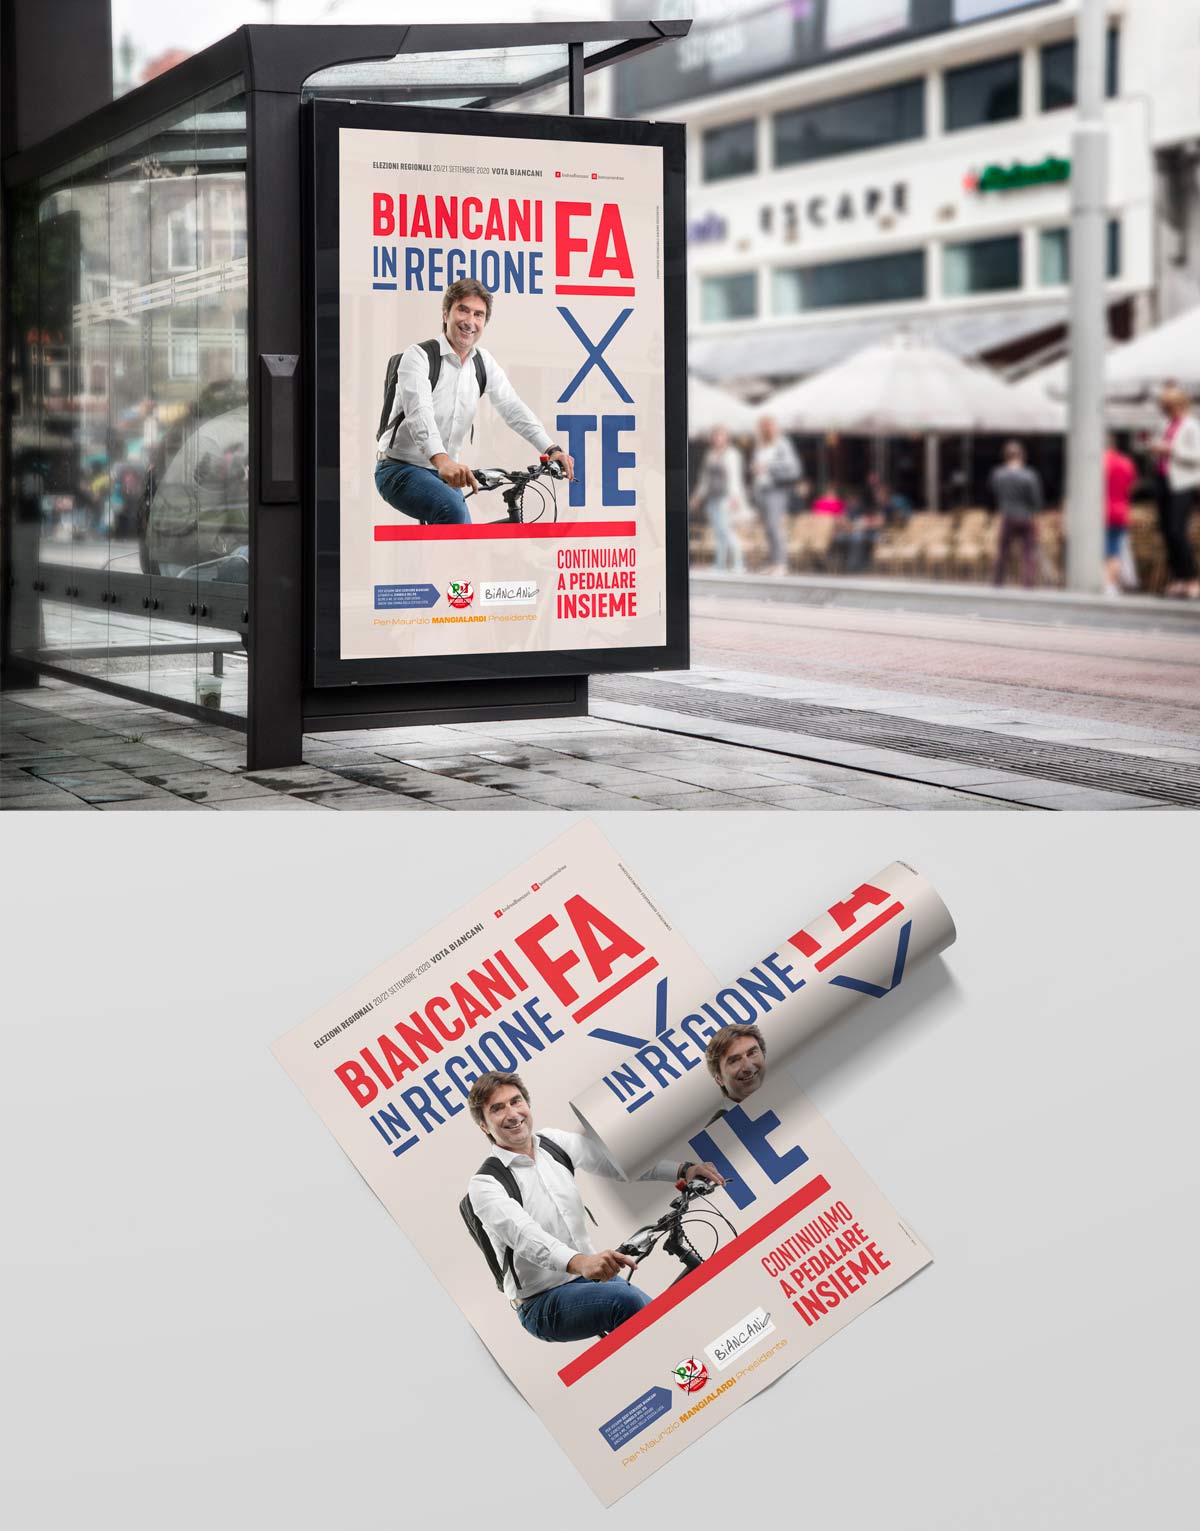 ANDREA BIANCANI – Political Regional Elections Campaign by Nicola Sancisi - Creative Work